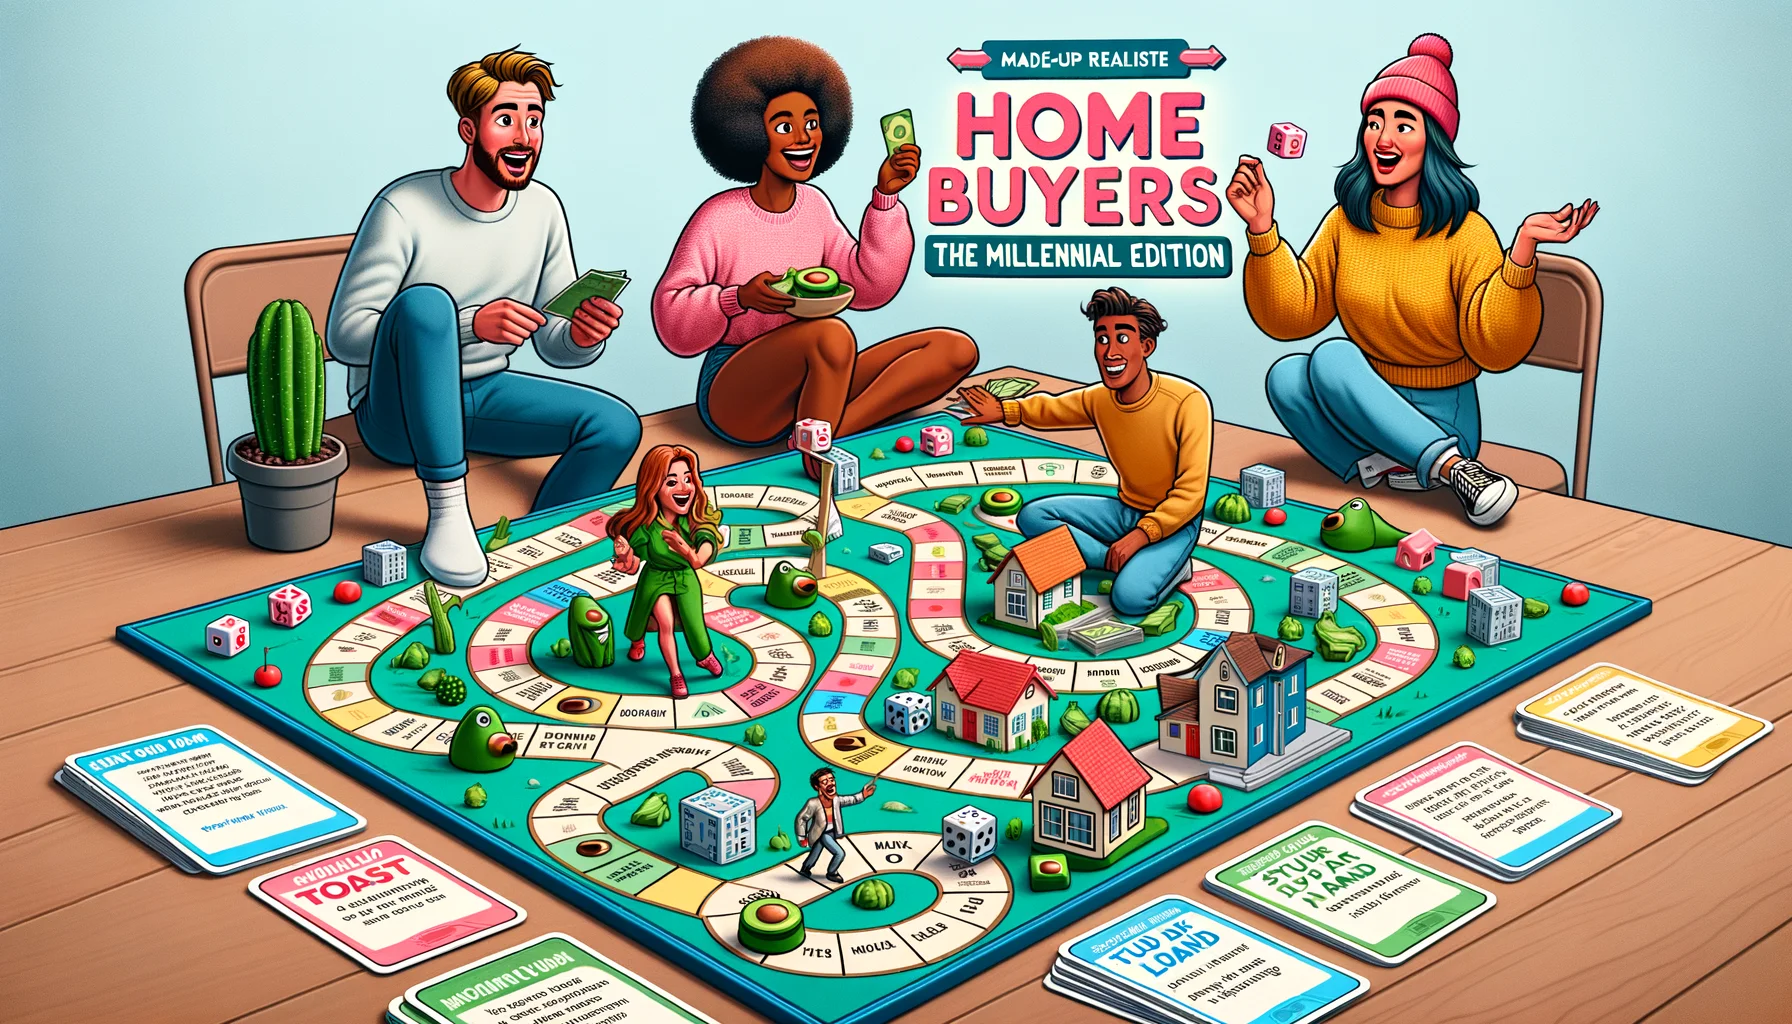 Create a playful and realistic image of a group of millennials participating in a made-up, humorous board game titled 'Home Buyers: The Millennial Edition.' The board game is designed with a winding path representing the home buying process, filled with eventful and comical obstacles such as 'avocado toast land' and 'student loan jungle.' Include diverse characters: a Caucasian male who is laughing while maneuvering a game piece, a Black woman rolling the dice with a focused expression, a Hispanic man looking delightfully surprised by a 'Bank of Mum and Dad' card, and an Asian female player holding an overpriced miniature house piece.